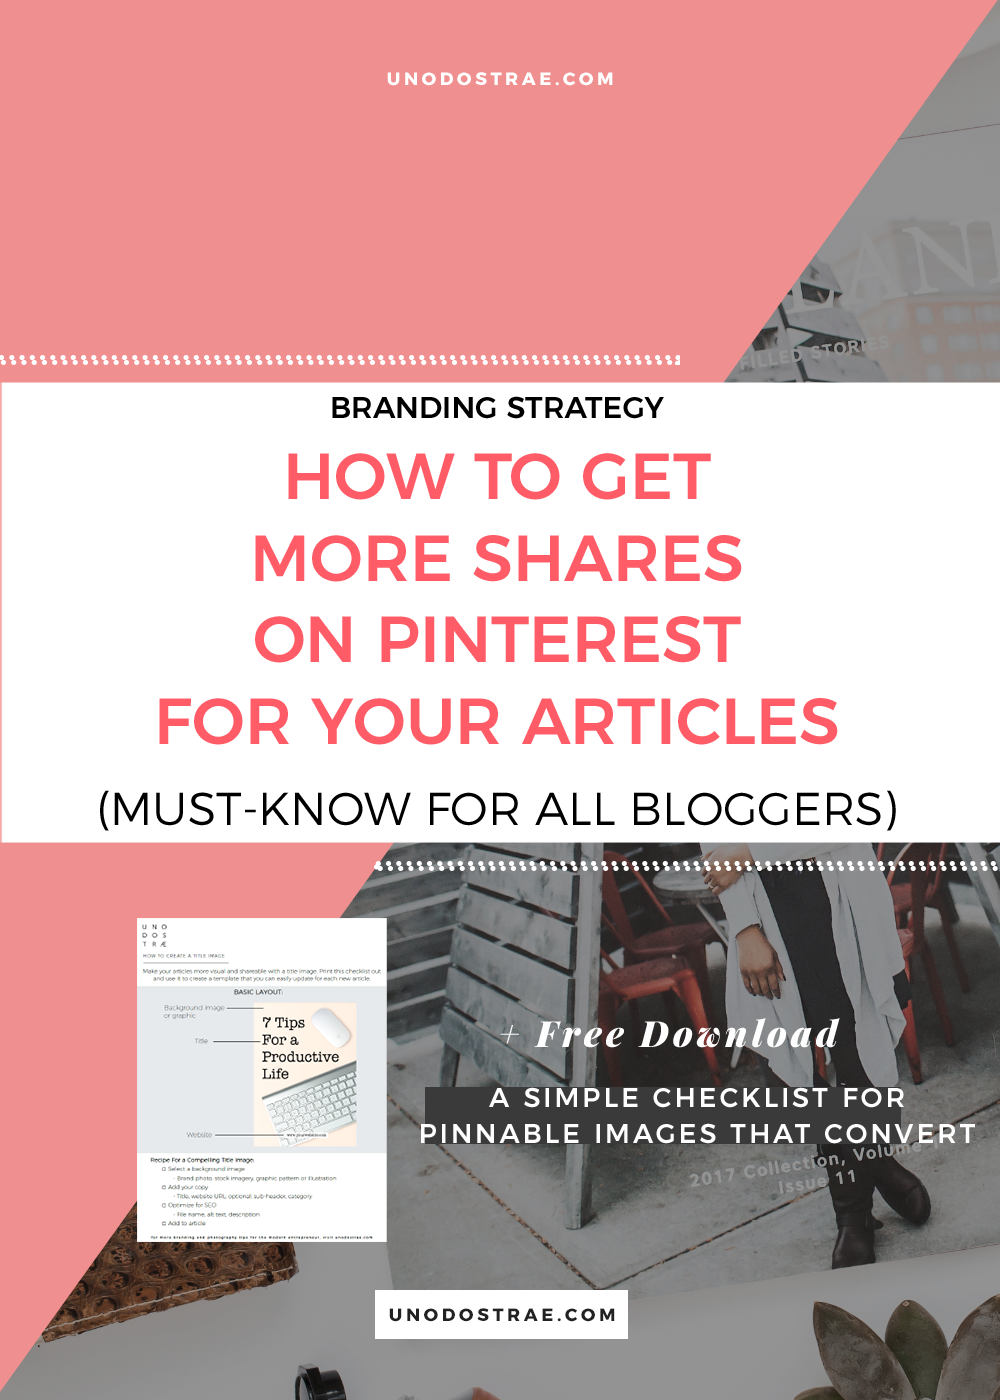 Want to get more shares on Pinterest for your content? Learn exactly how to hide a pinnable image in blog posts | unodostrae.com. #socialmedia #graphicdesign #entrepreneur #bloggers #seo #blogging101